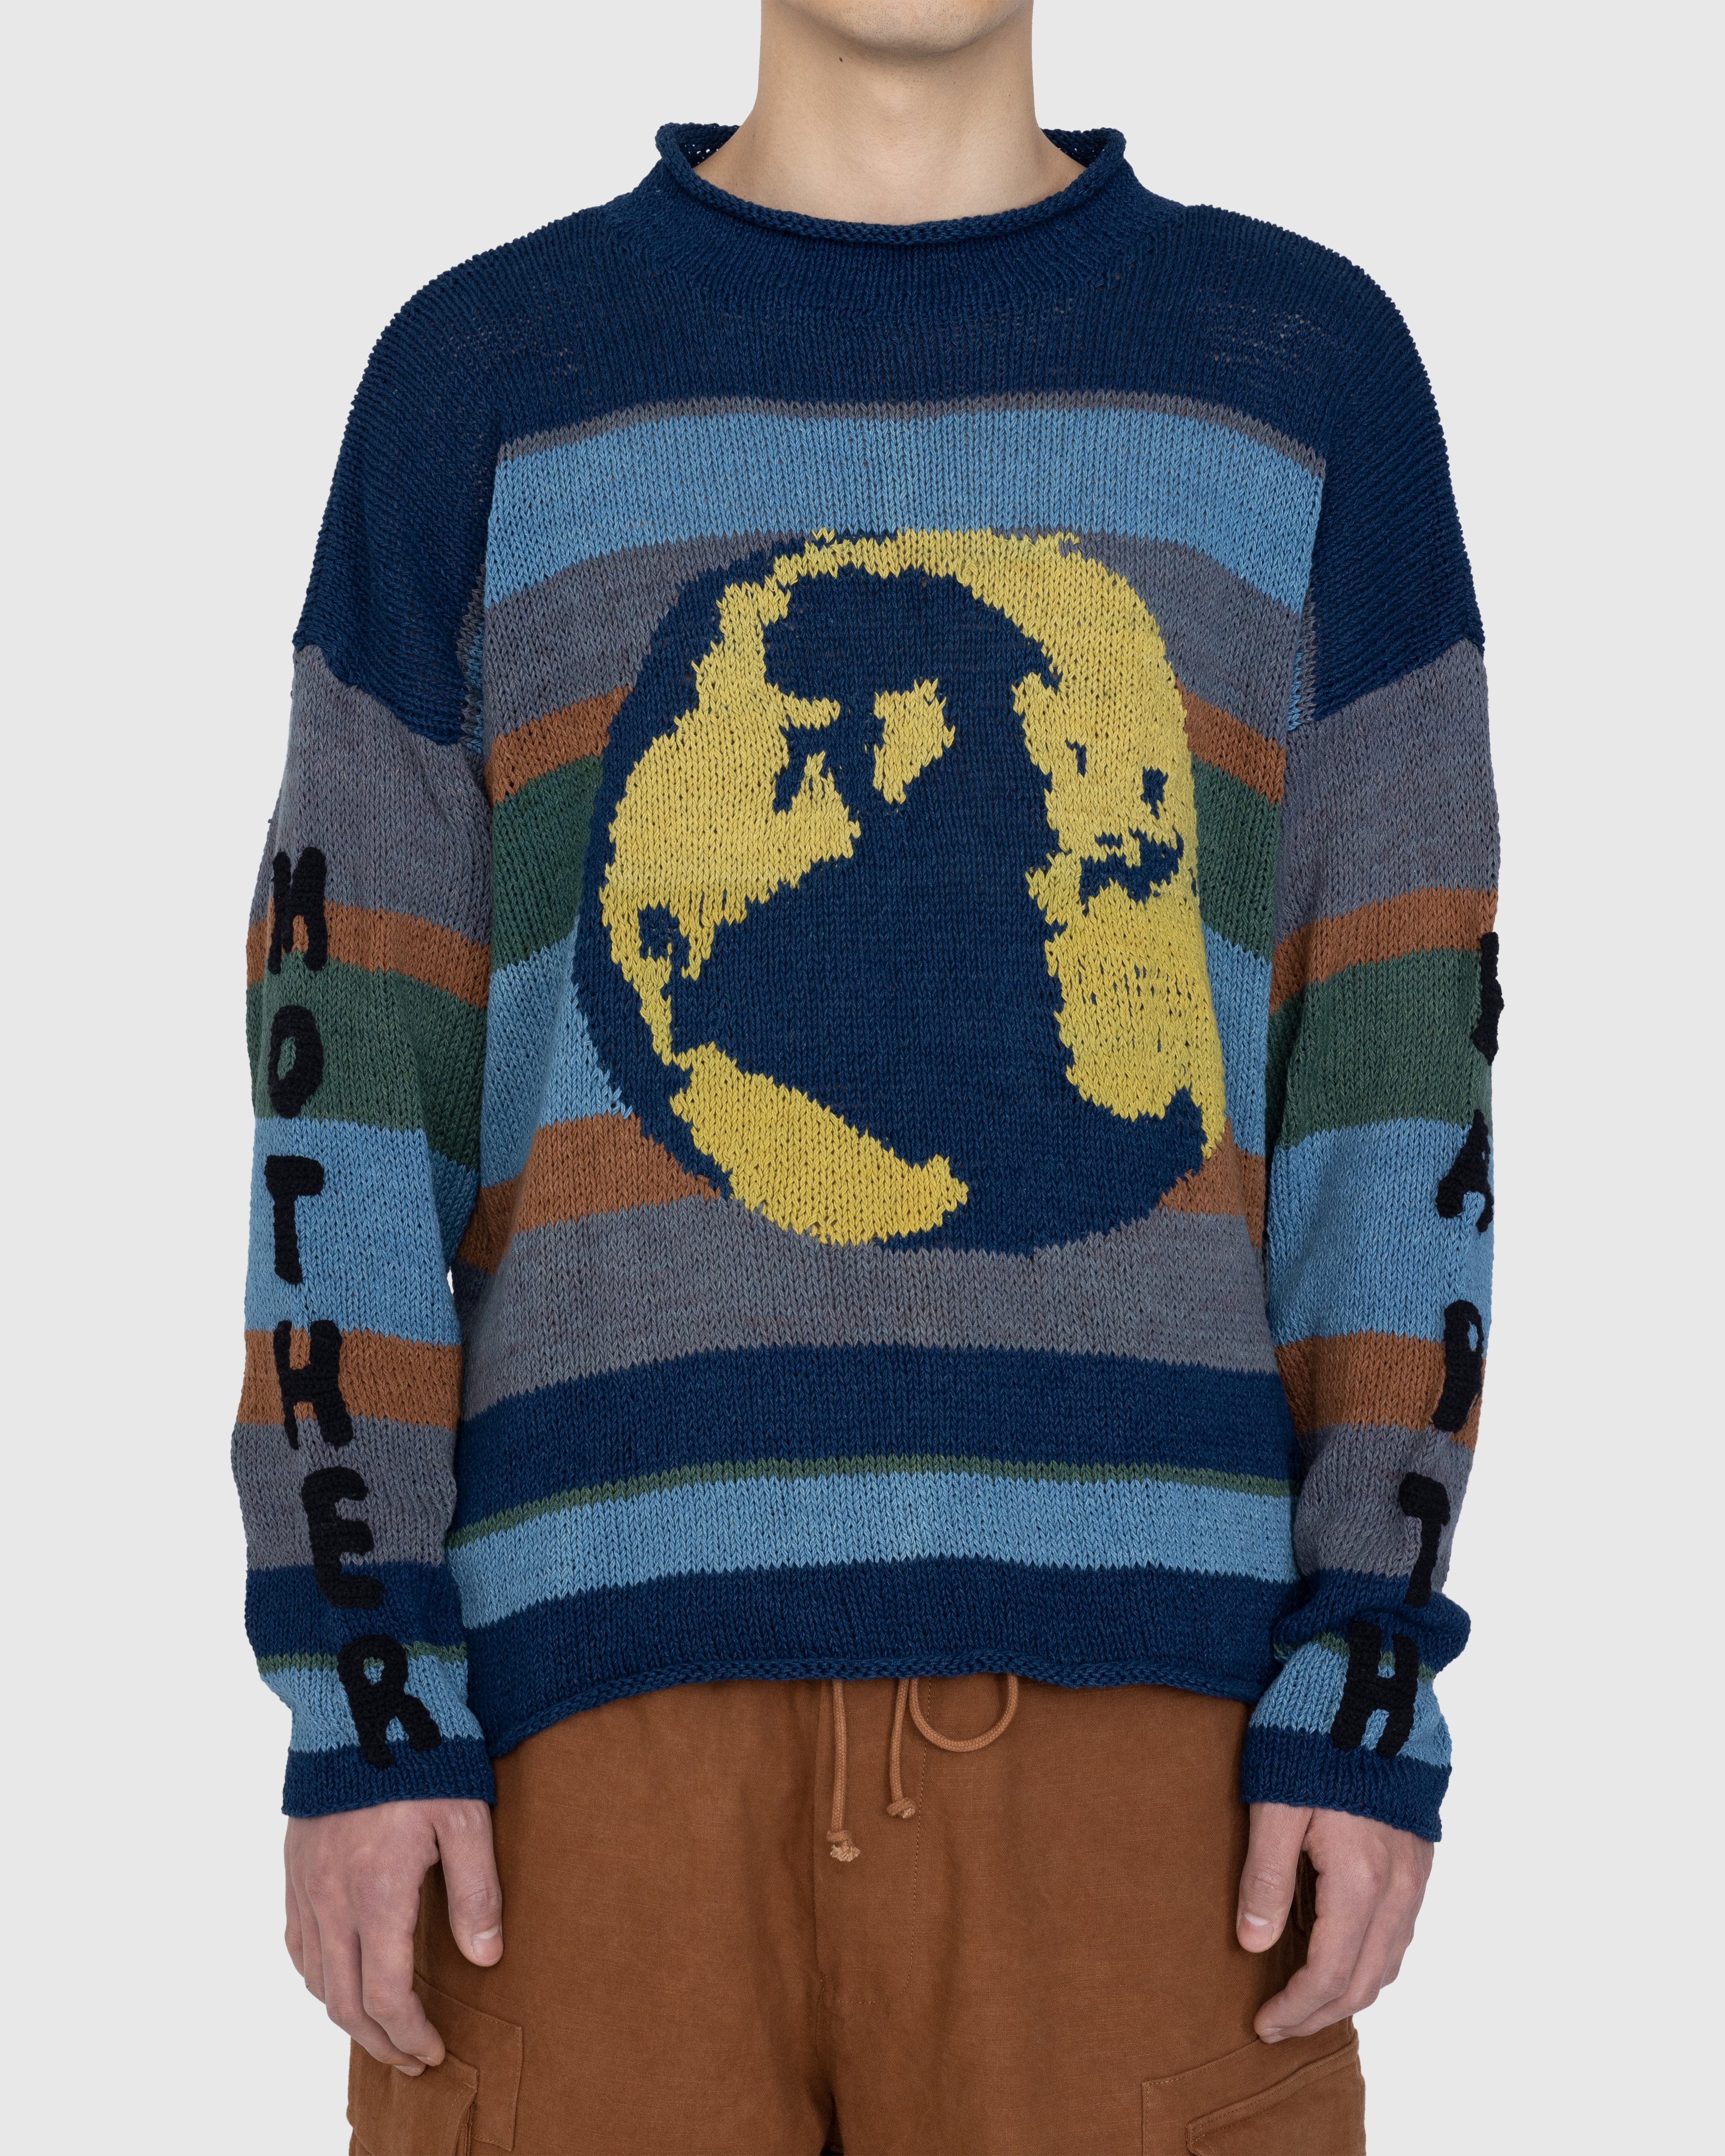 Story mfg. - Twinsun Rollneck Striped Mother Earth Multi - Clothing - Multi - Image 2